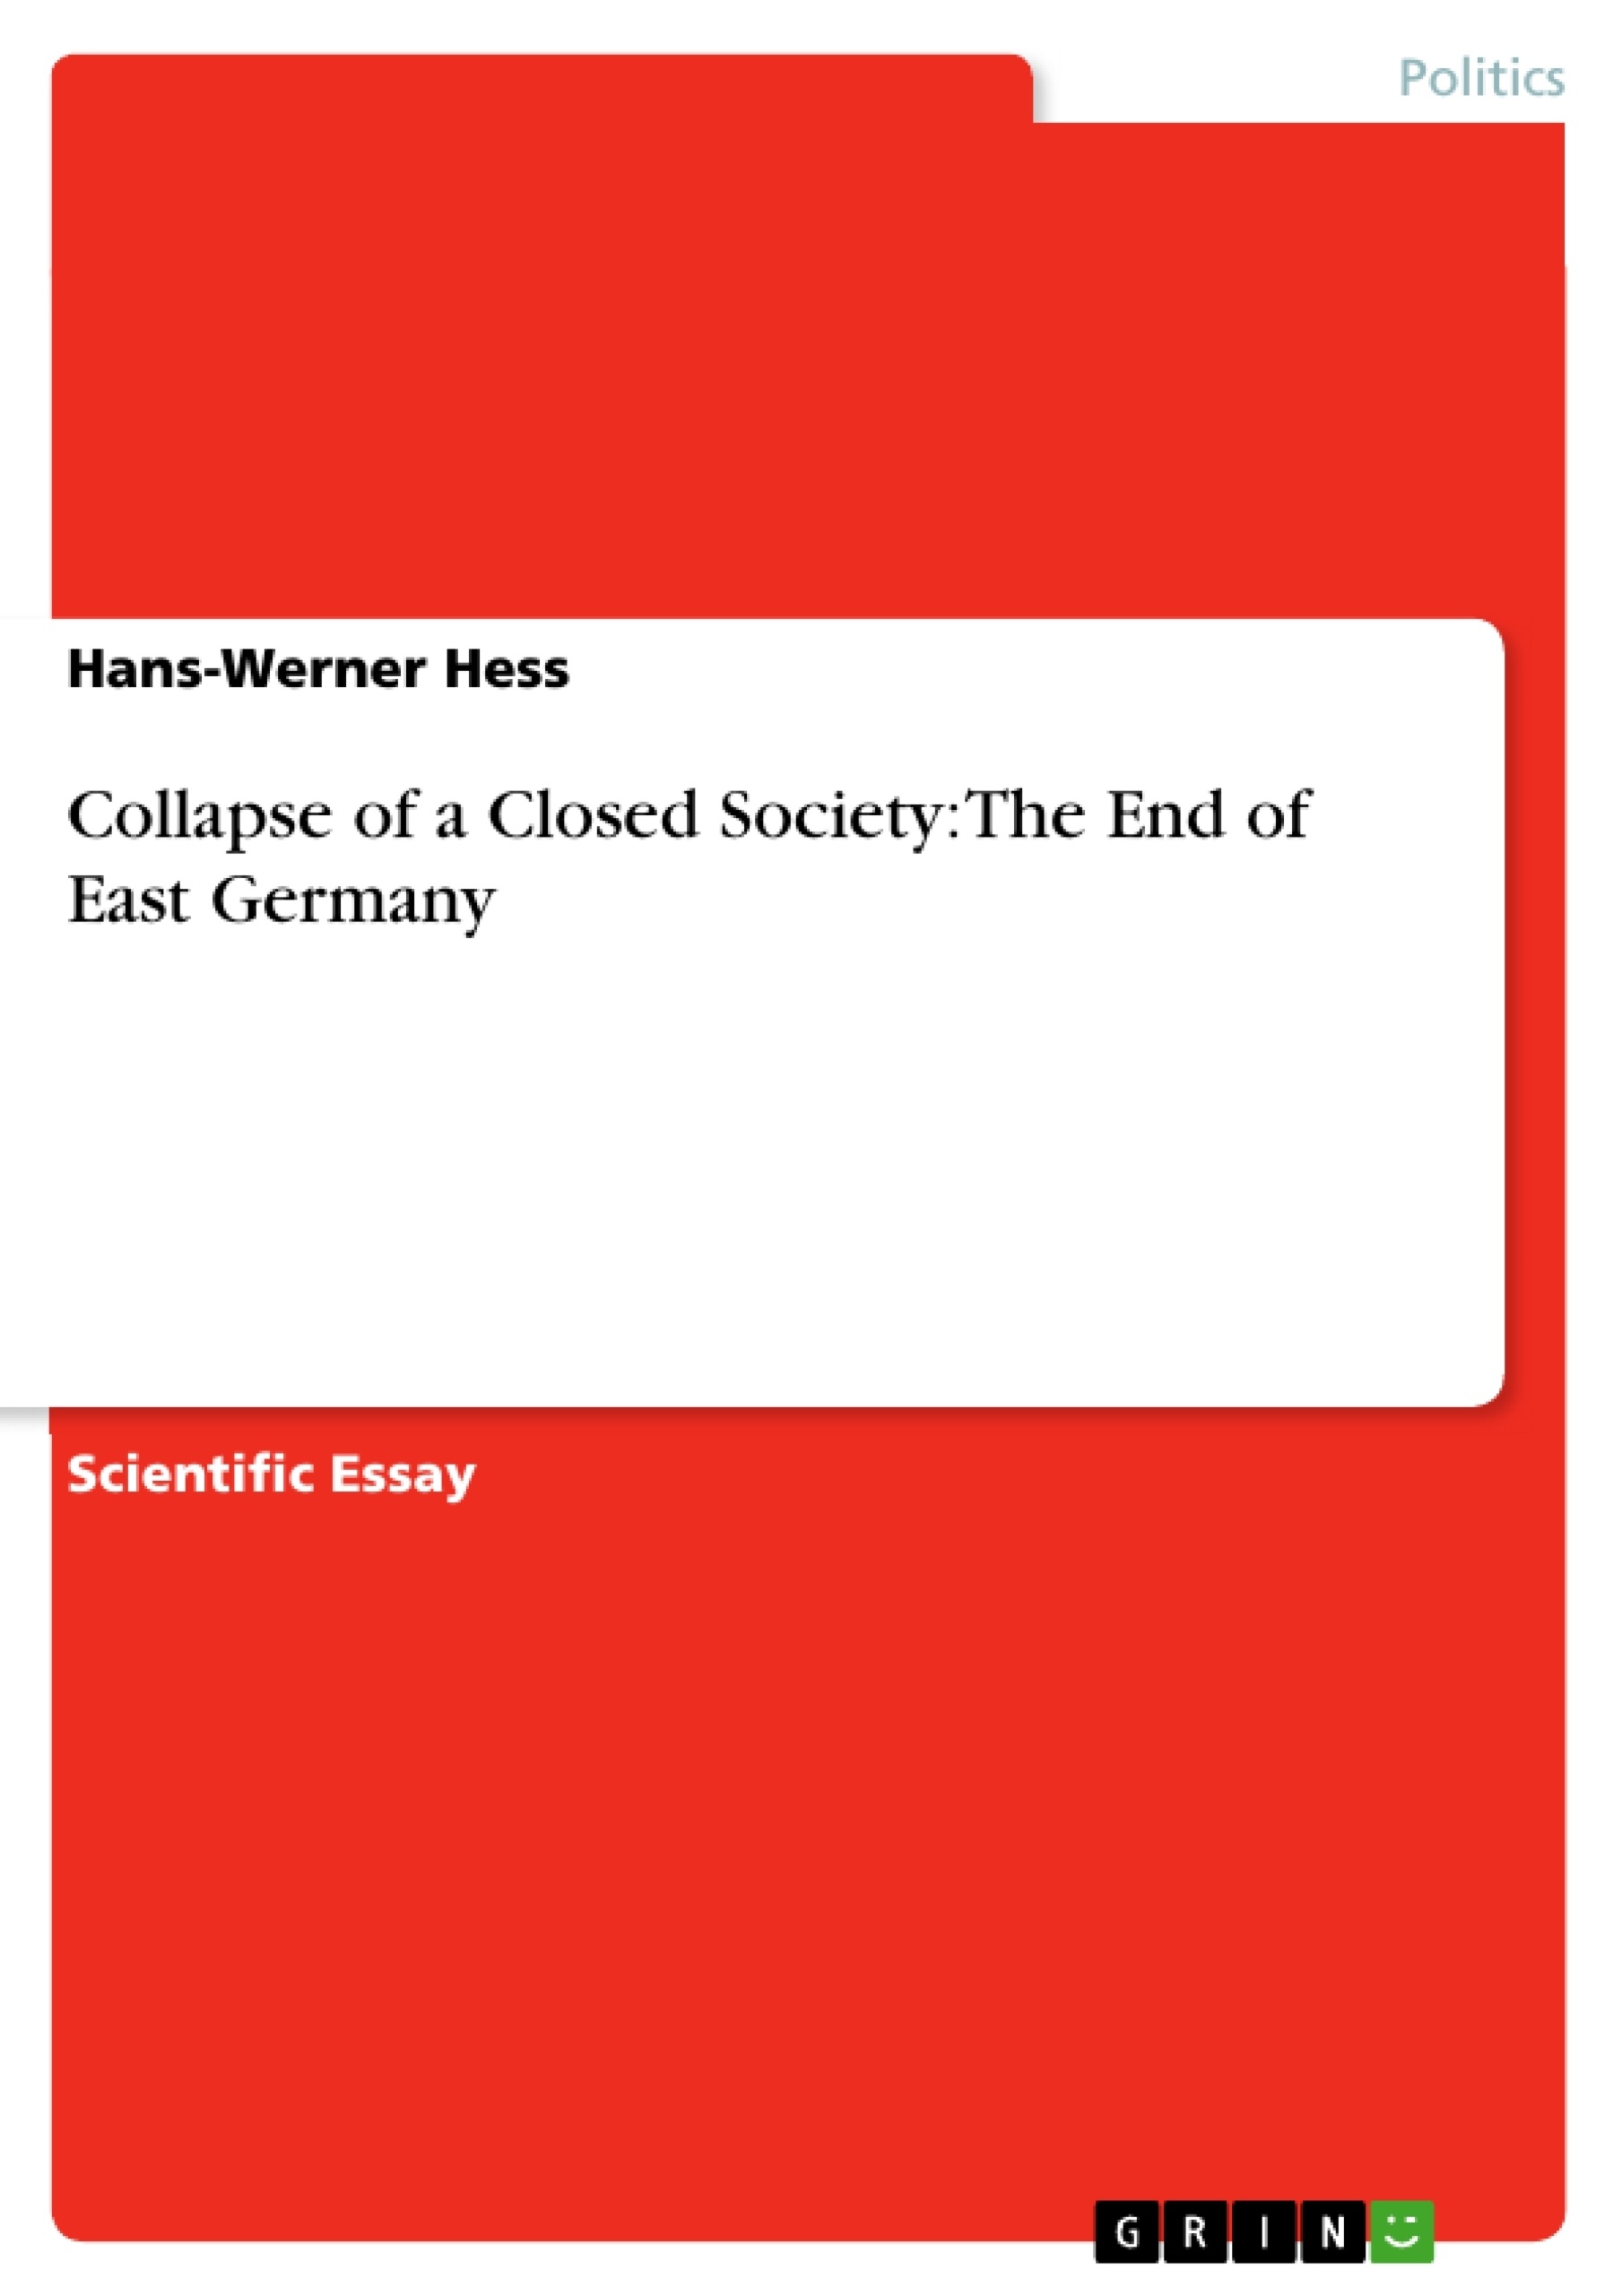 Title: Collapse of a Closed Society: The End of East Germany